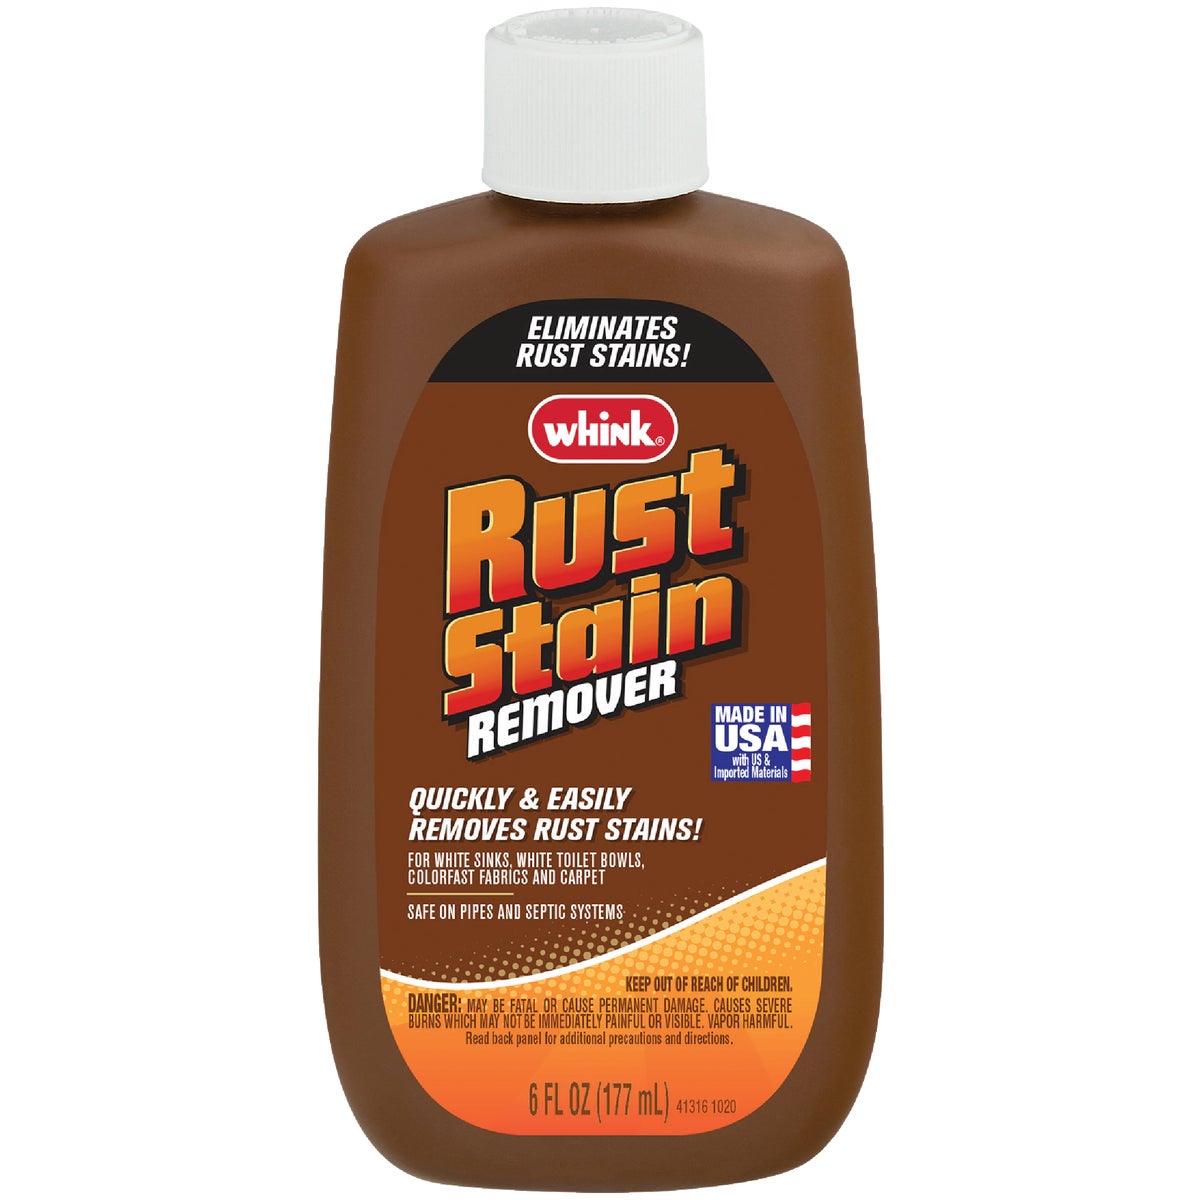 Item 613444, Rust stain remover safely and easily removes stains from white sinks and 